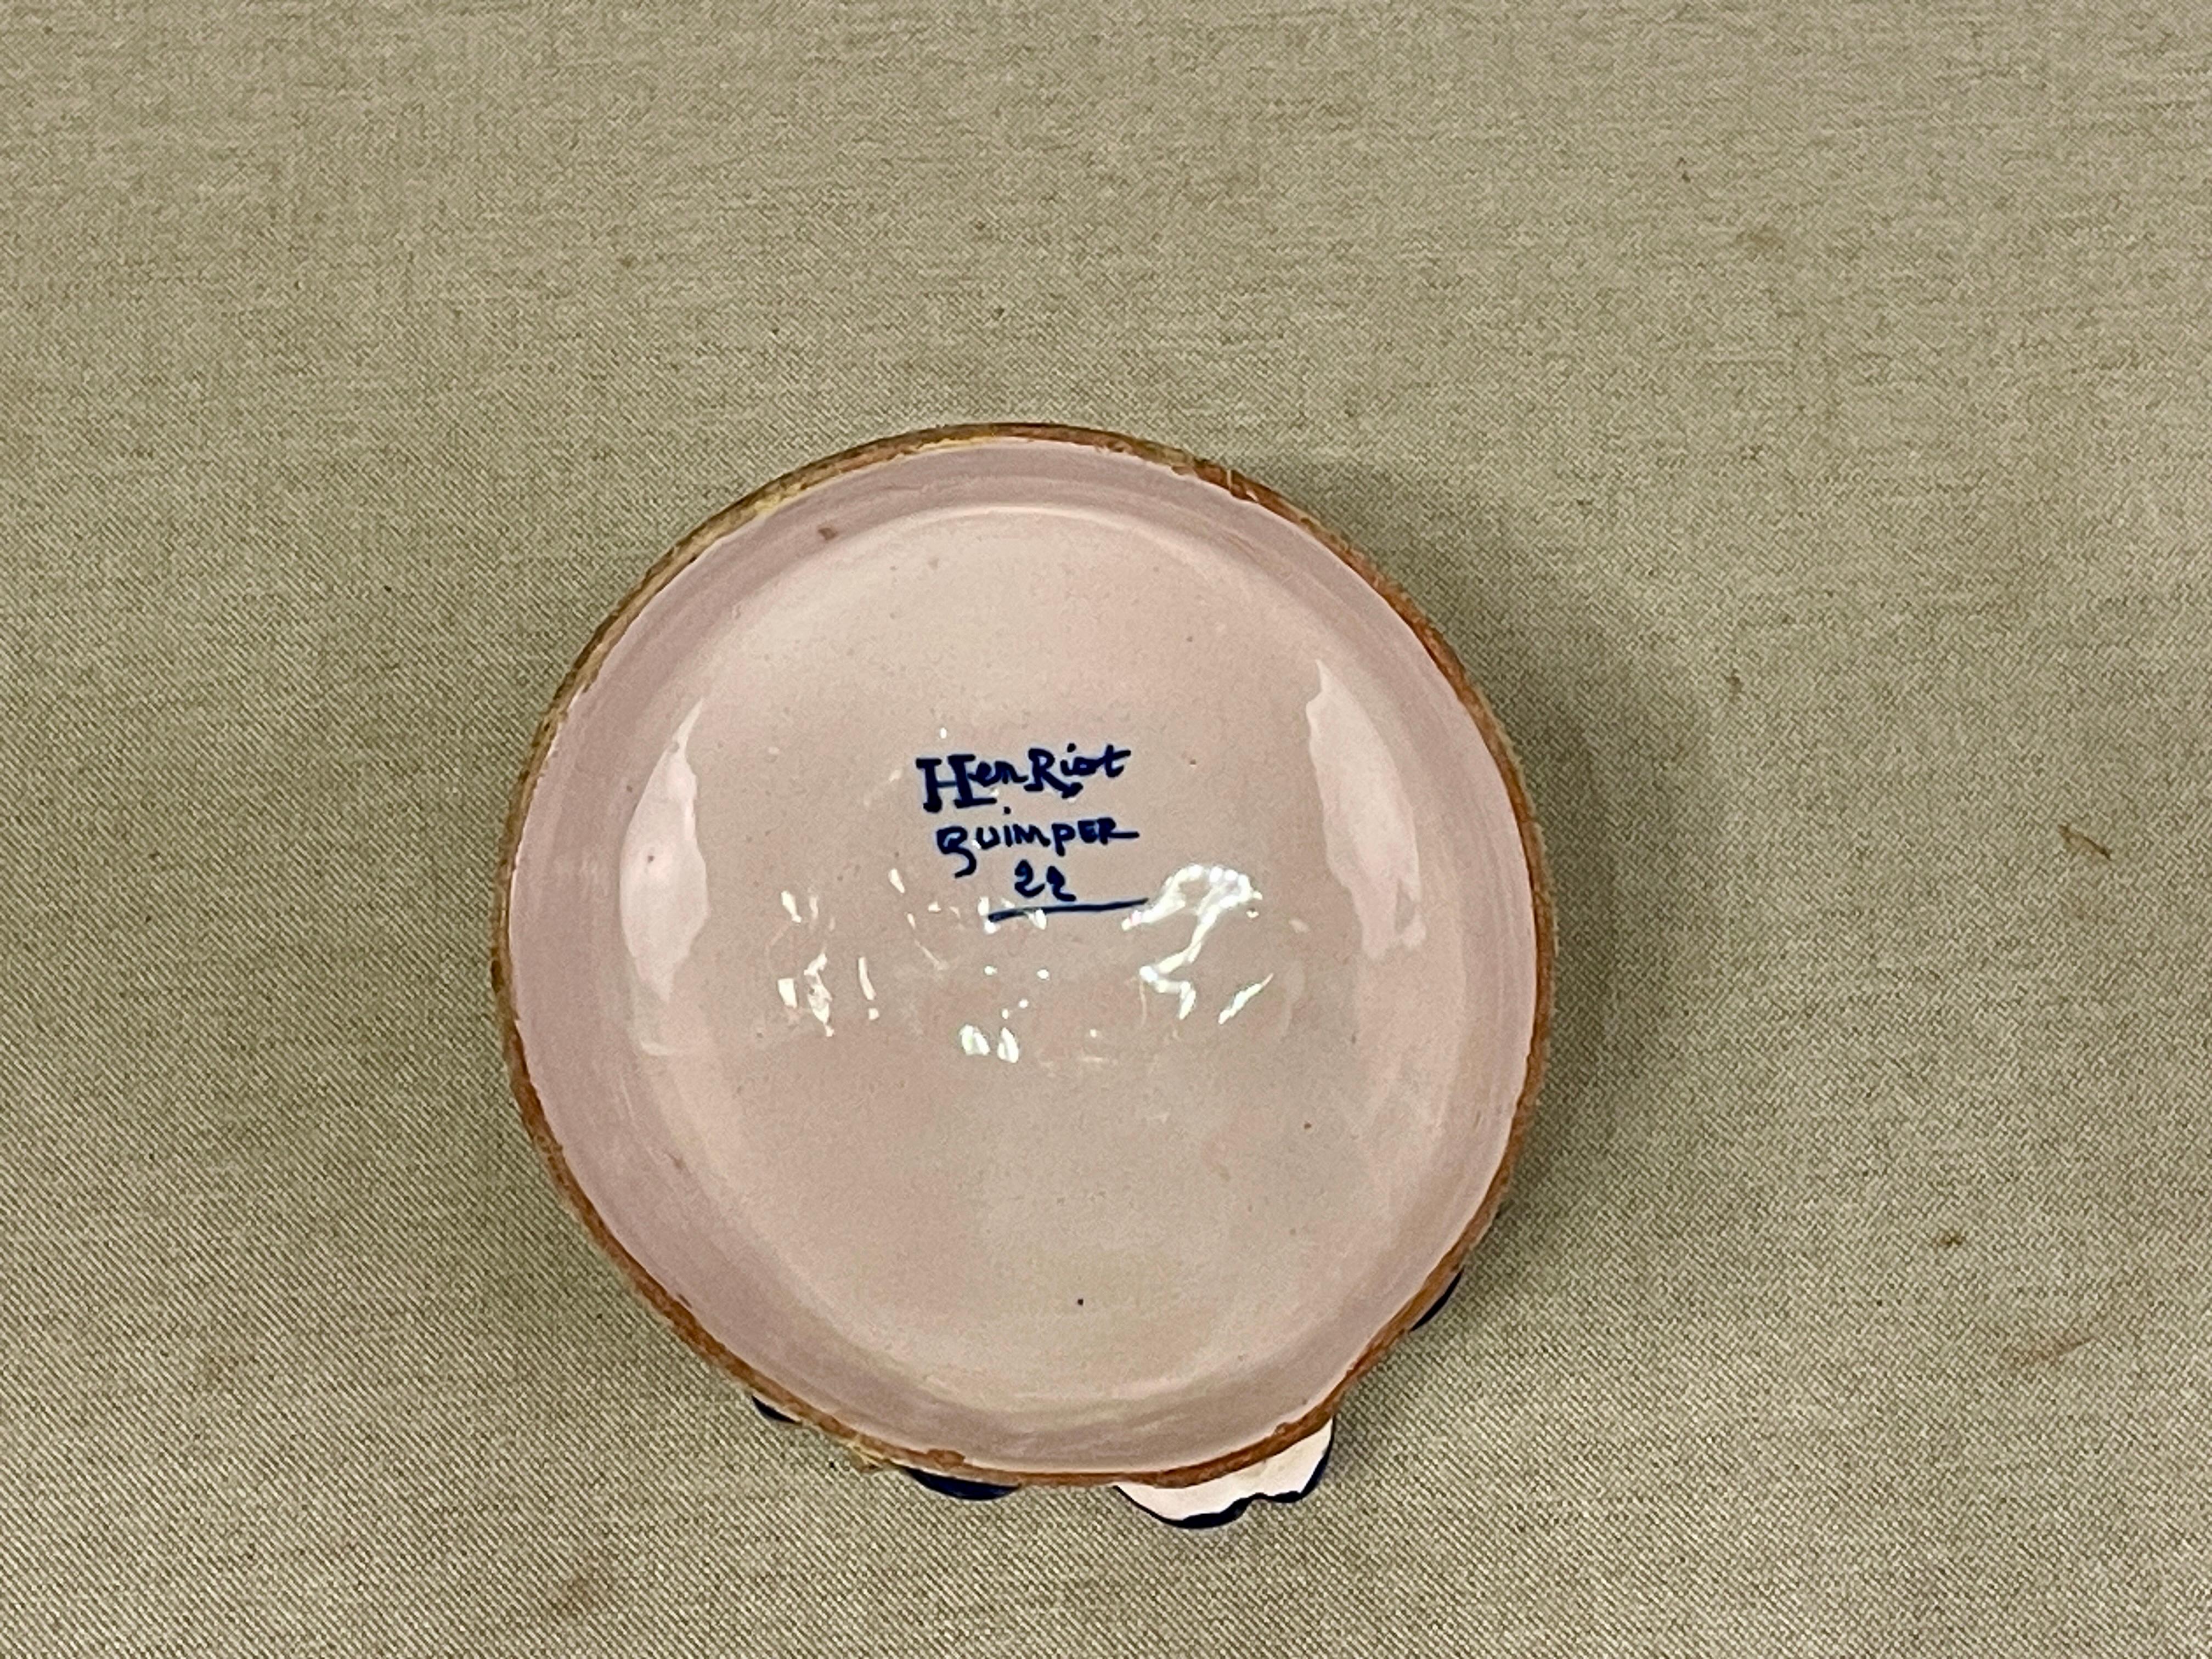 French Henriot Quimper Faience Butter Dish In Good Condition For Sale In Winter Park, FL